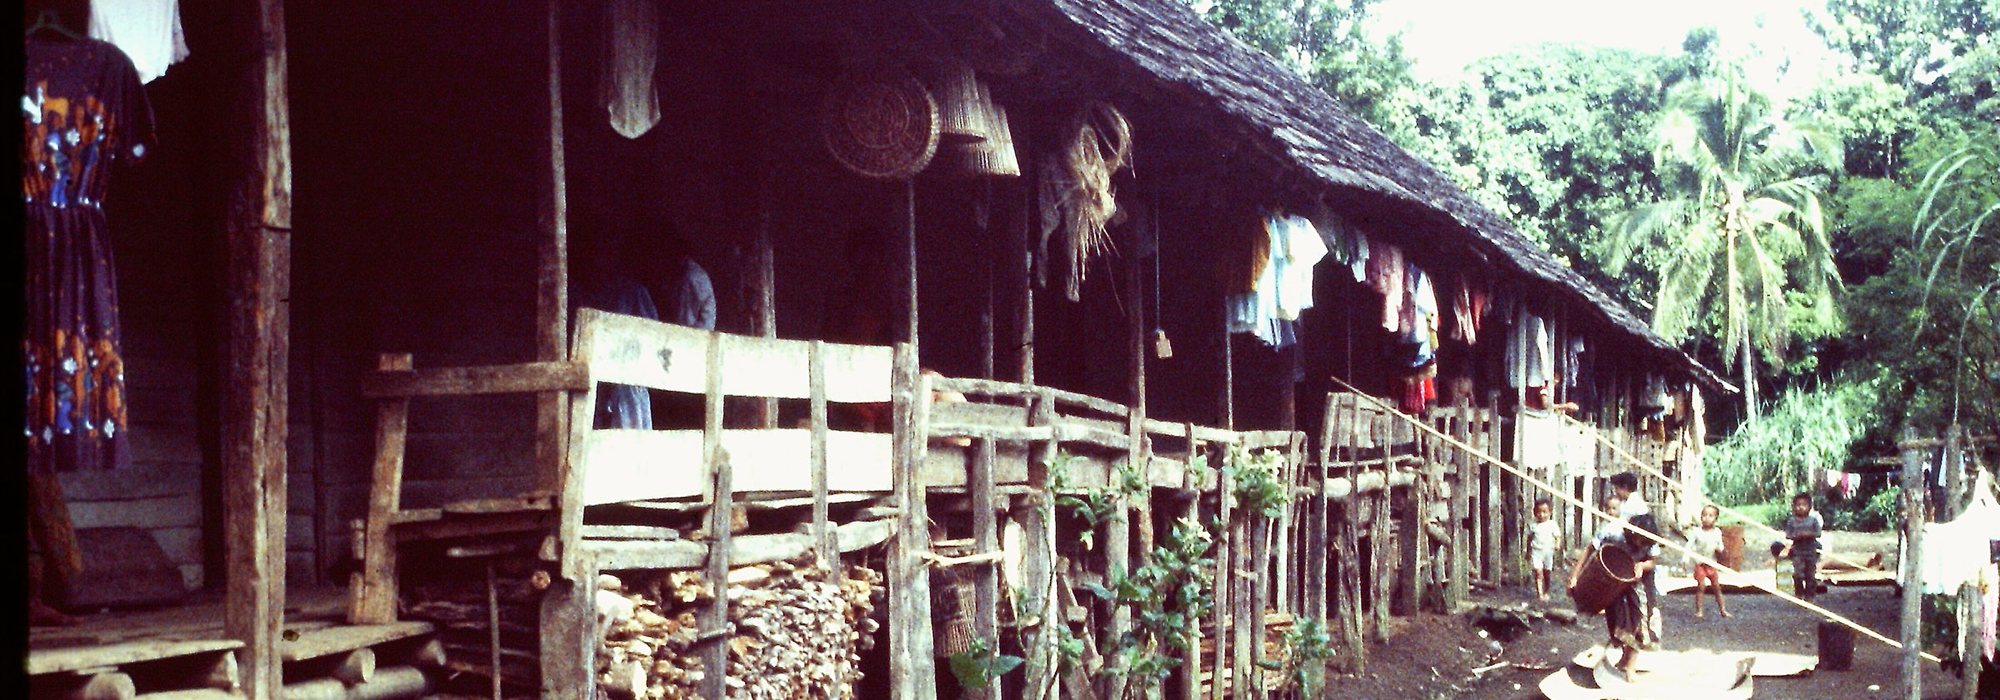 detail, figure 1. A longhouse in the Kenyah Lepo.